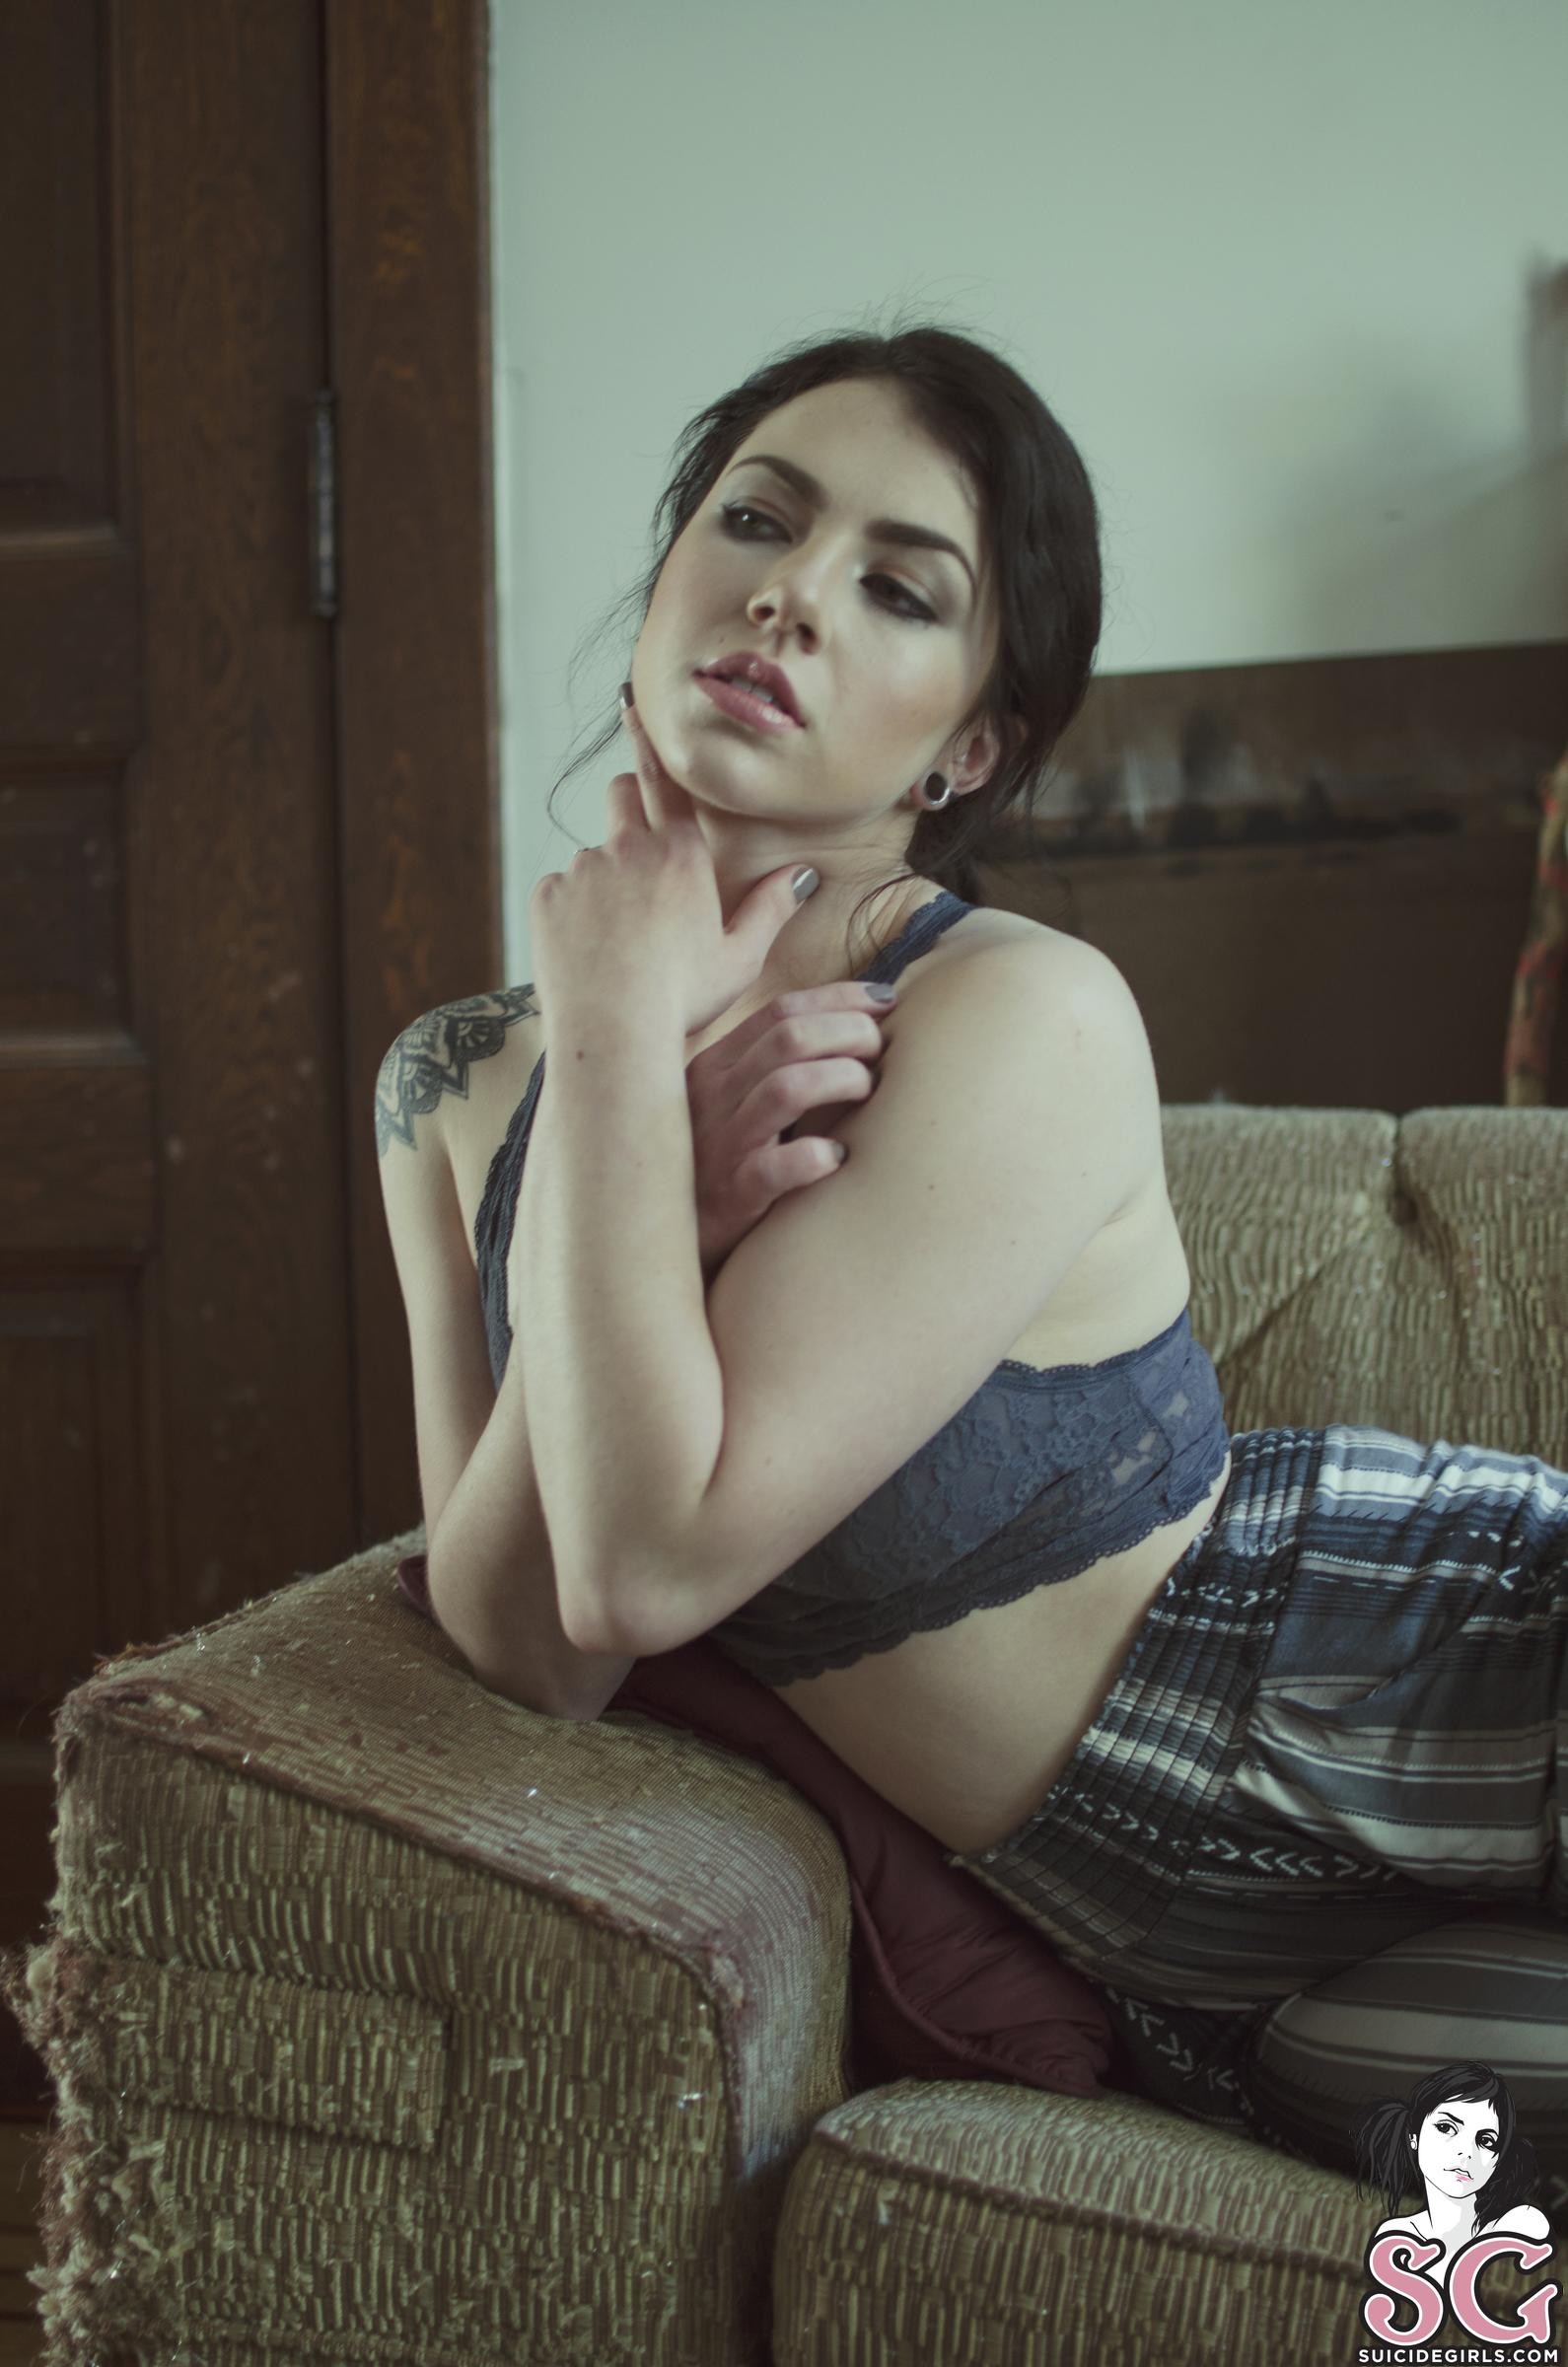 dennis acdan recommends Milenci Suicide Girl